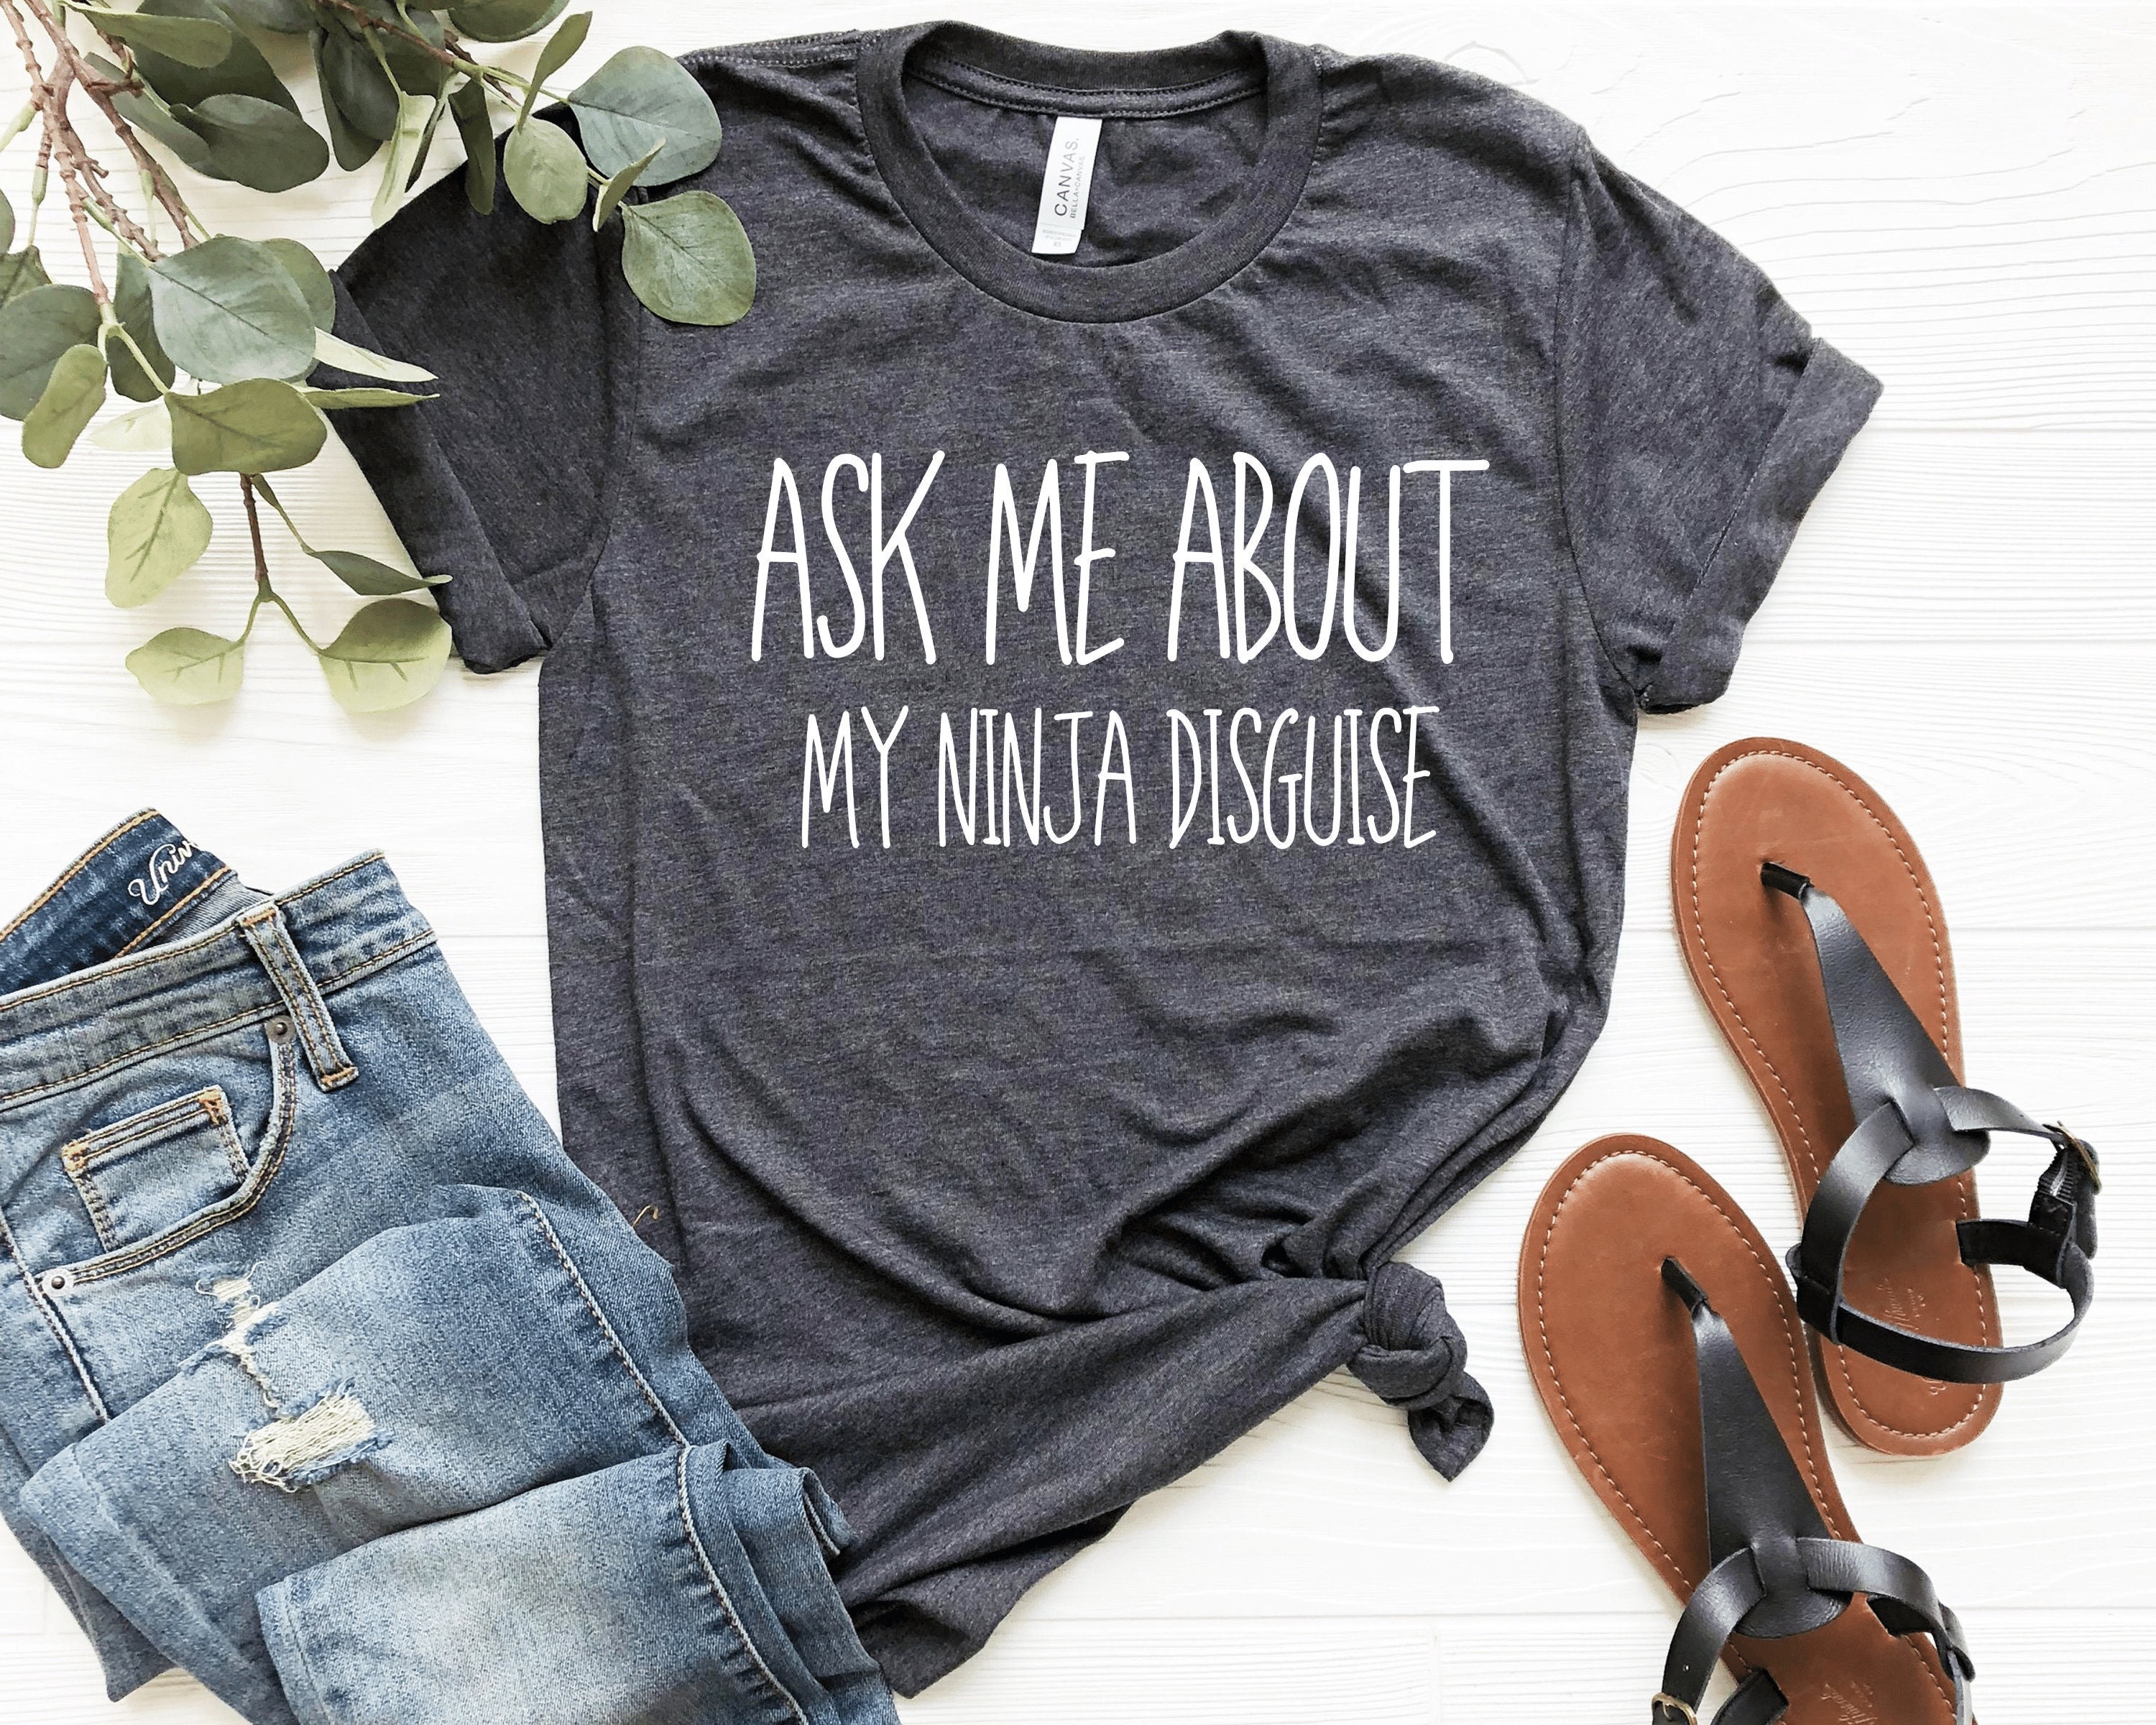 Ask Me About My Ninja T-Shirt  Cool Sh*t You Can Buy - Find Cool Things To  Buy